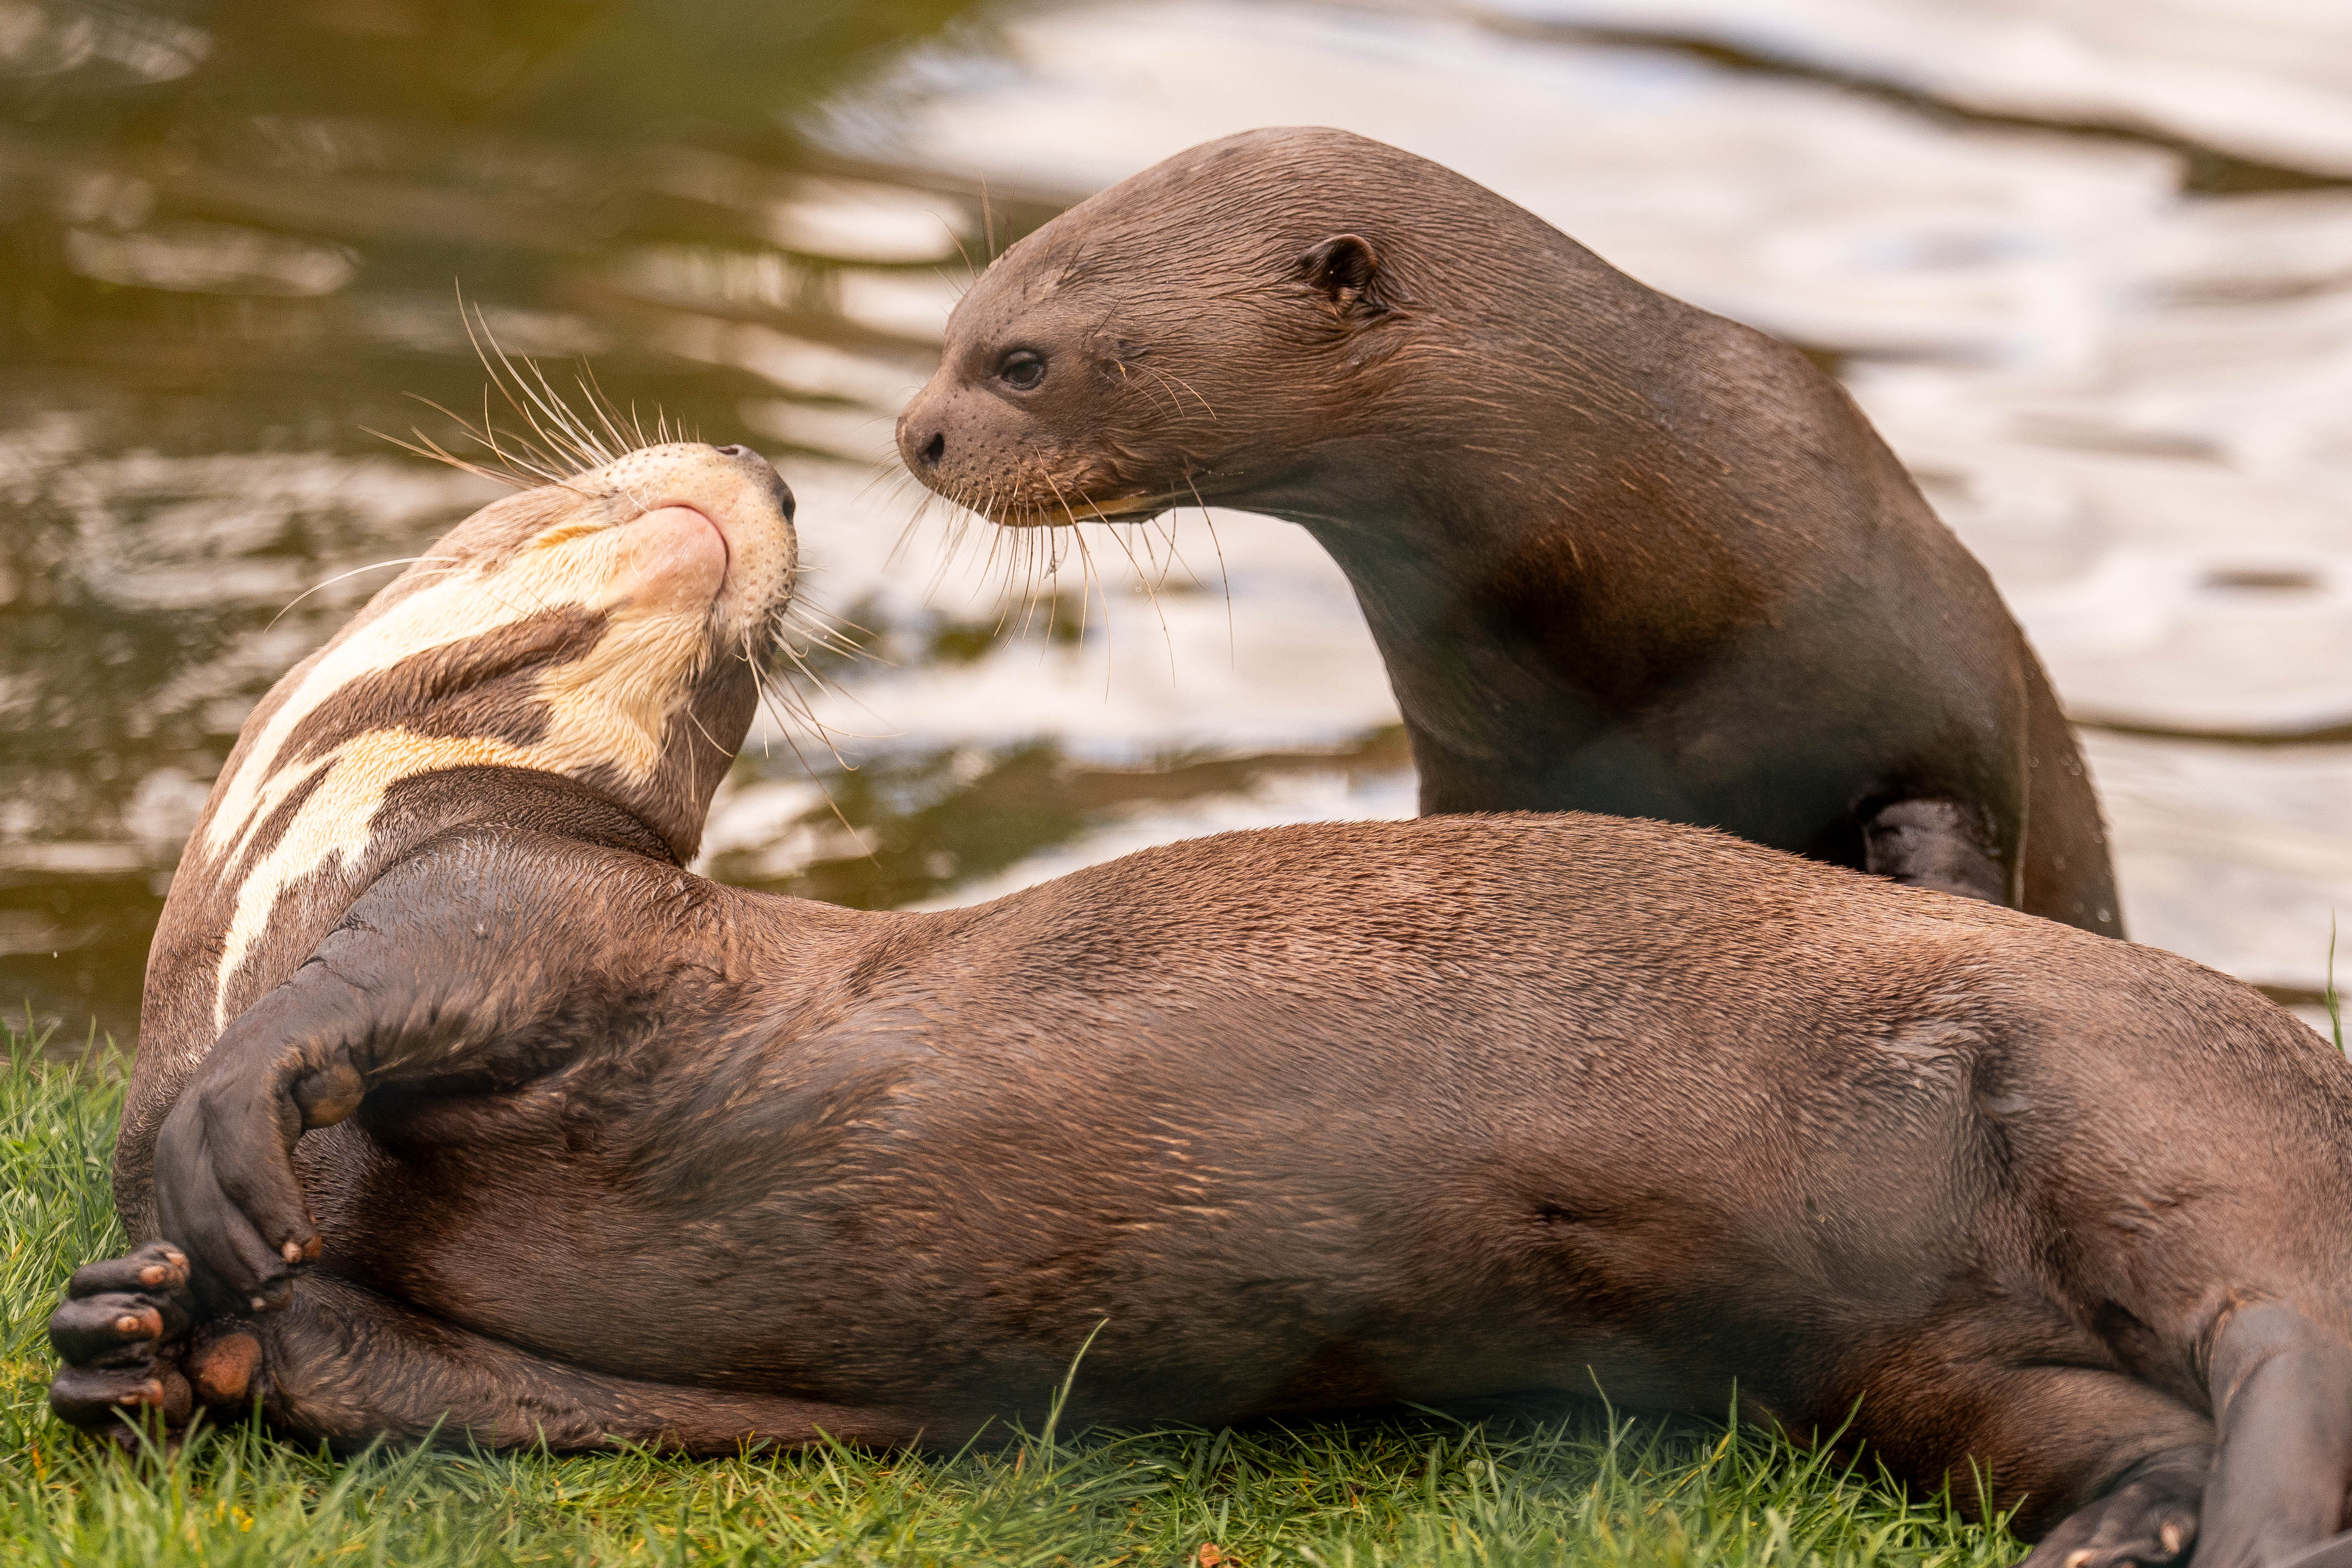 An undated photo shows two giant otters at Chester Zoo, UK, where they 